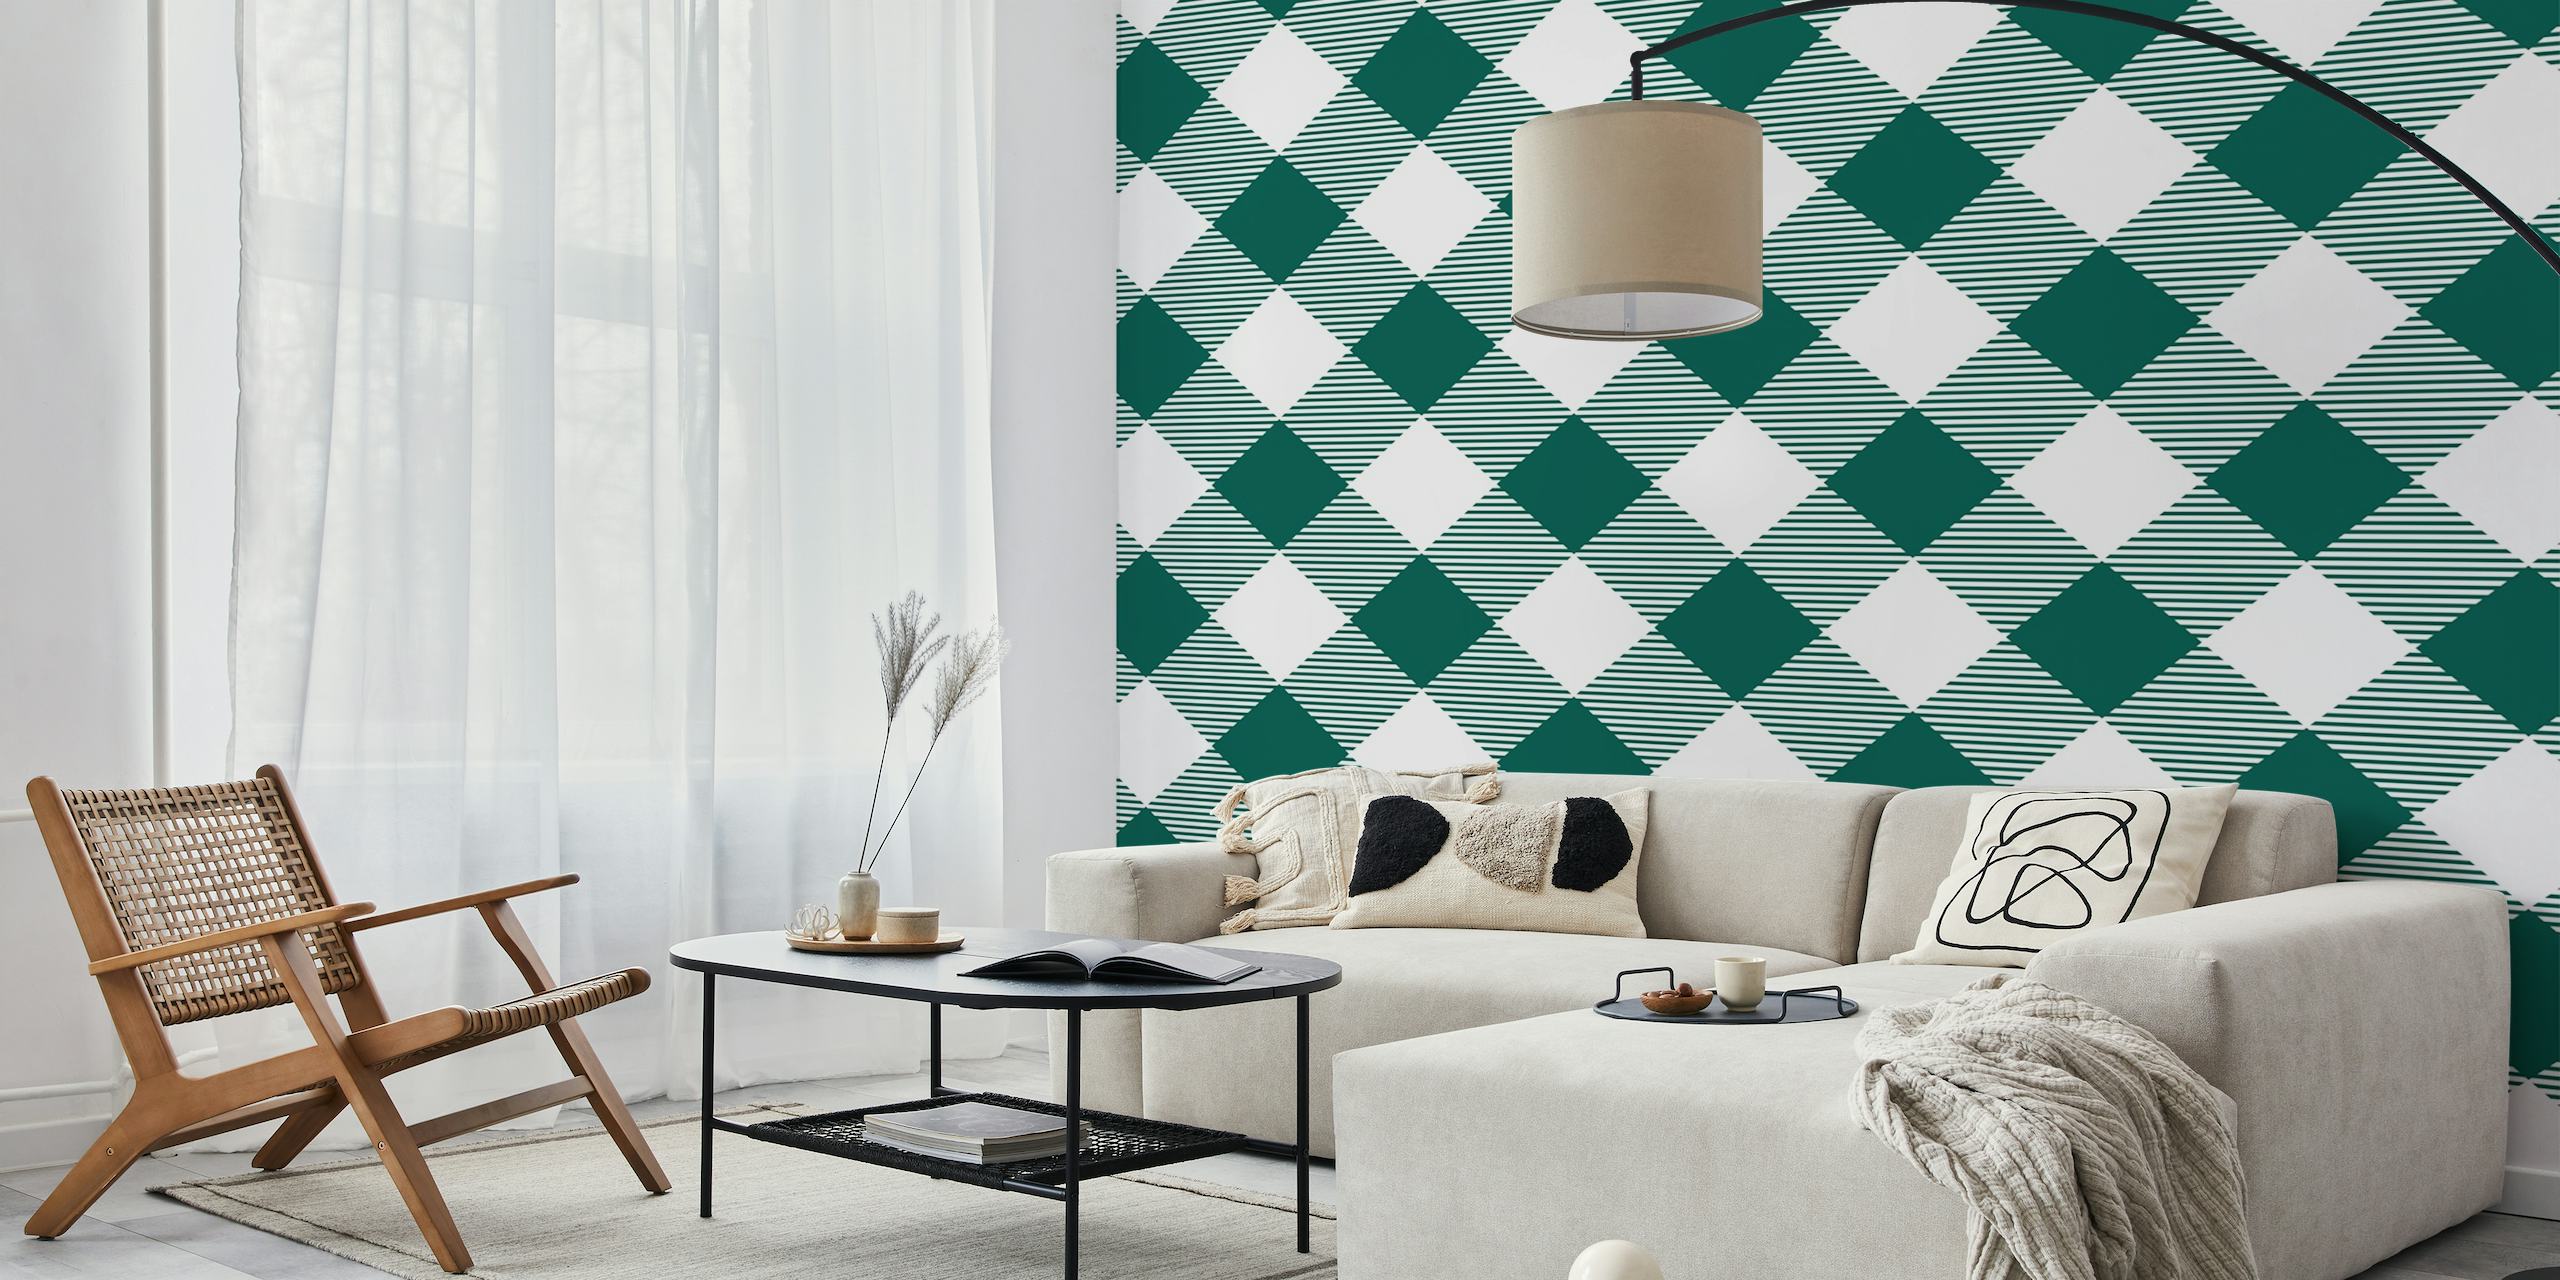 Plaid trending pattern in green color tapetit